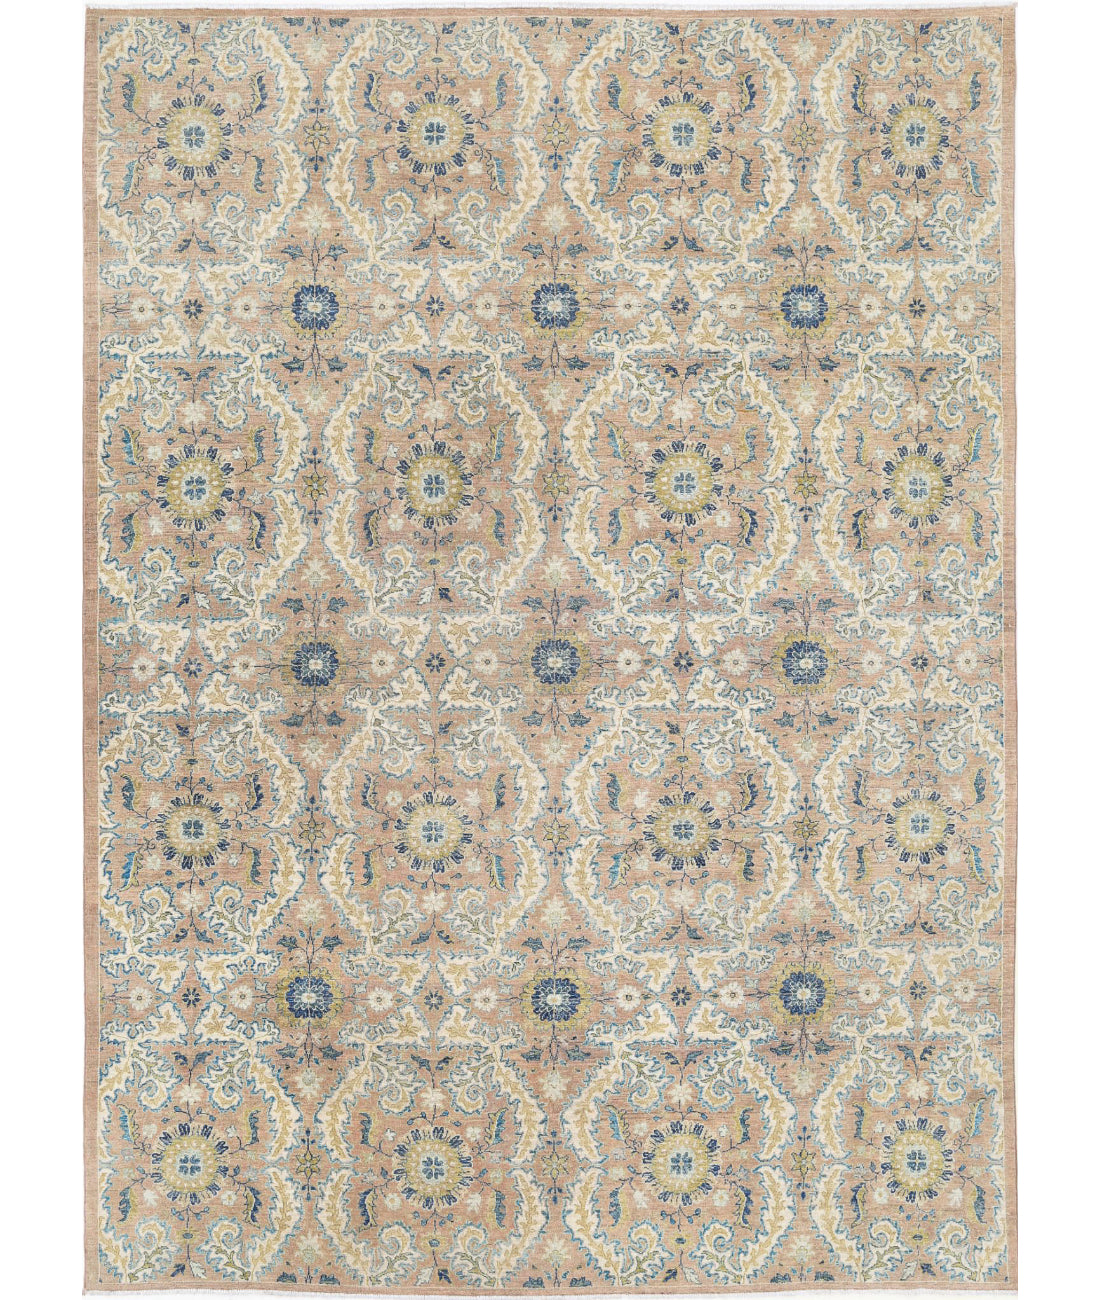 Hand Knotted Artemix Wool Rug - 8'10'' x 12'2'' 8'10'' x 12'2'' (265 X 365) / Tan / Ivory